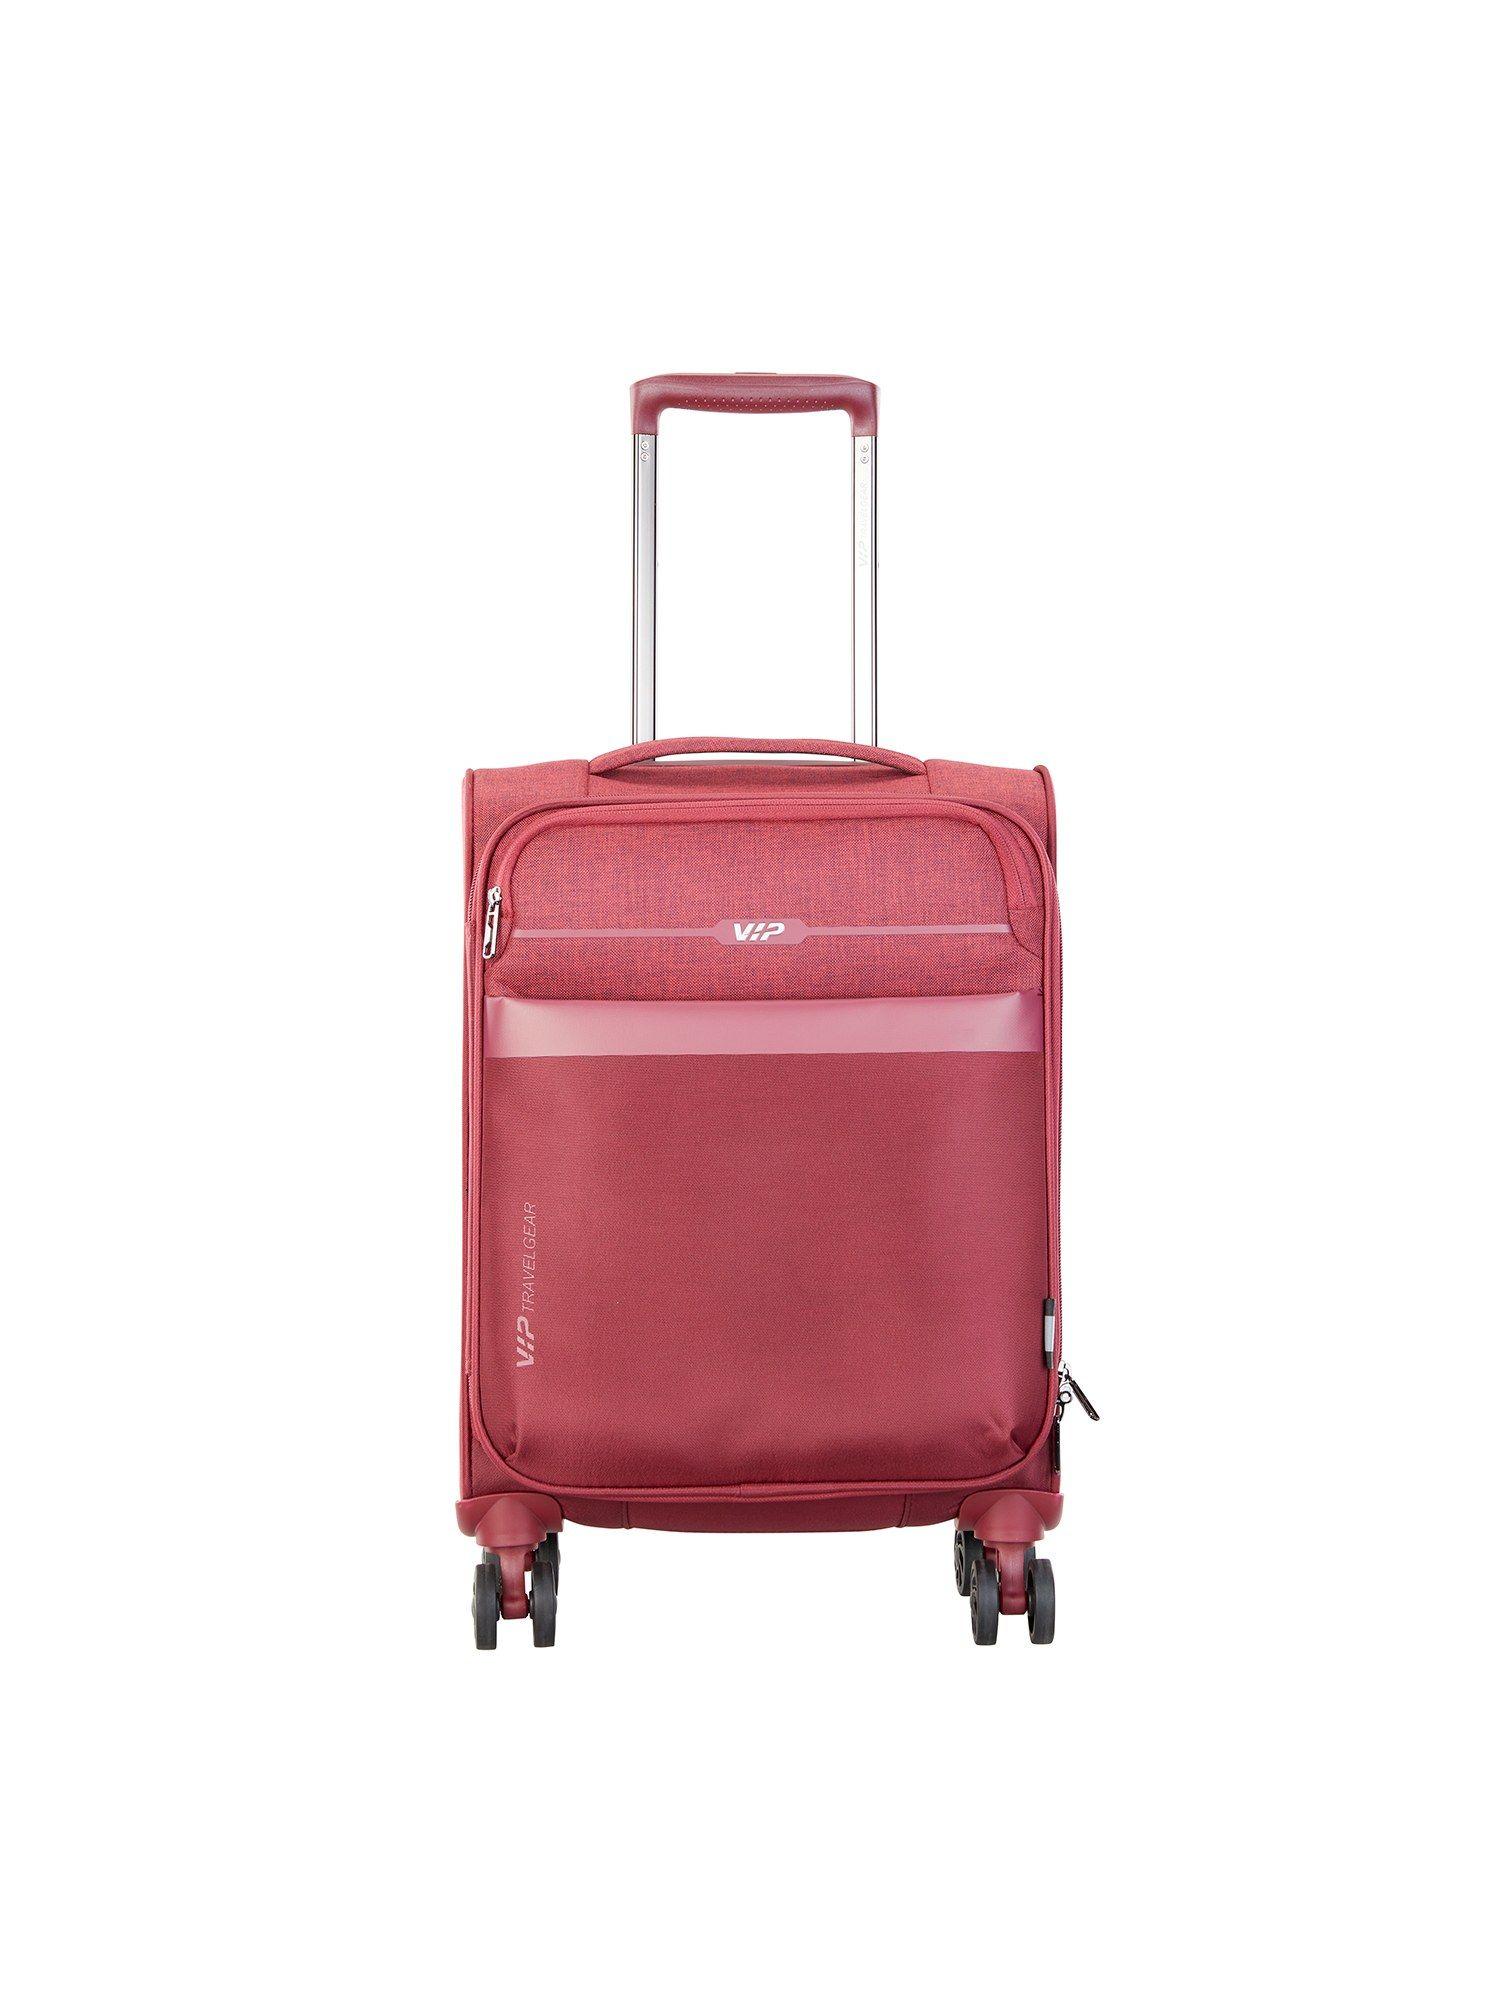 cabin trolley with 8 wheels on suitcase, 360 degree spin red luggage bag